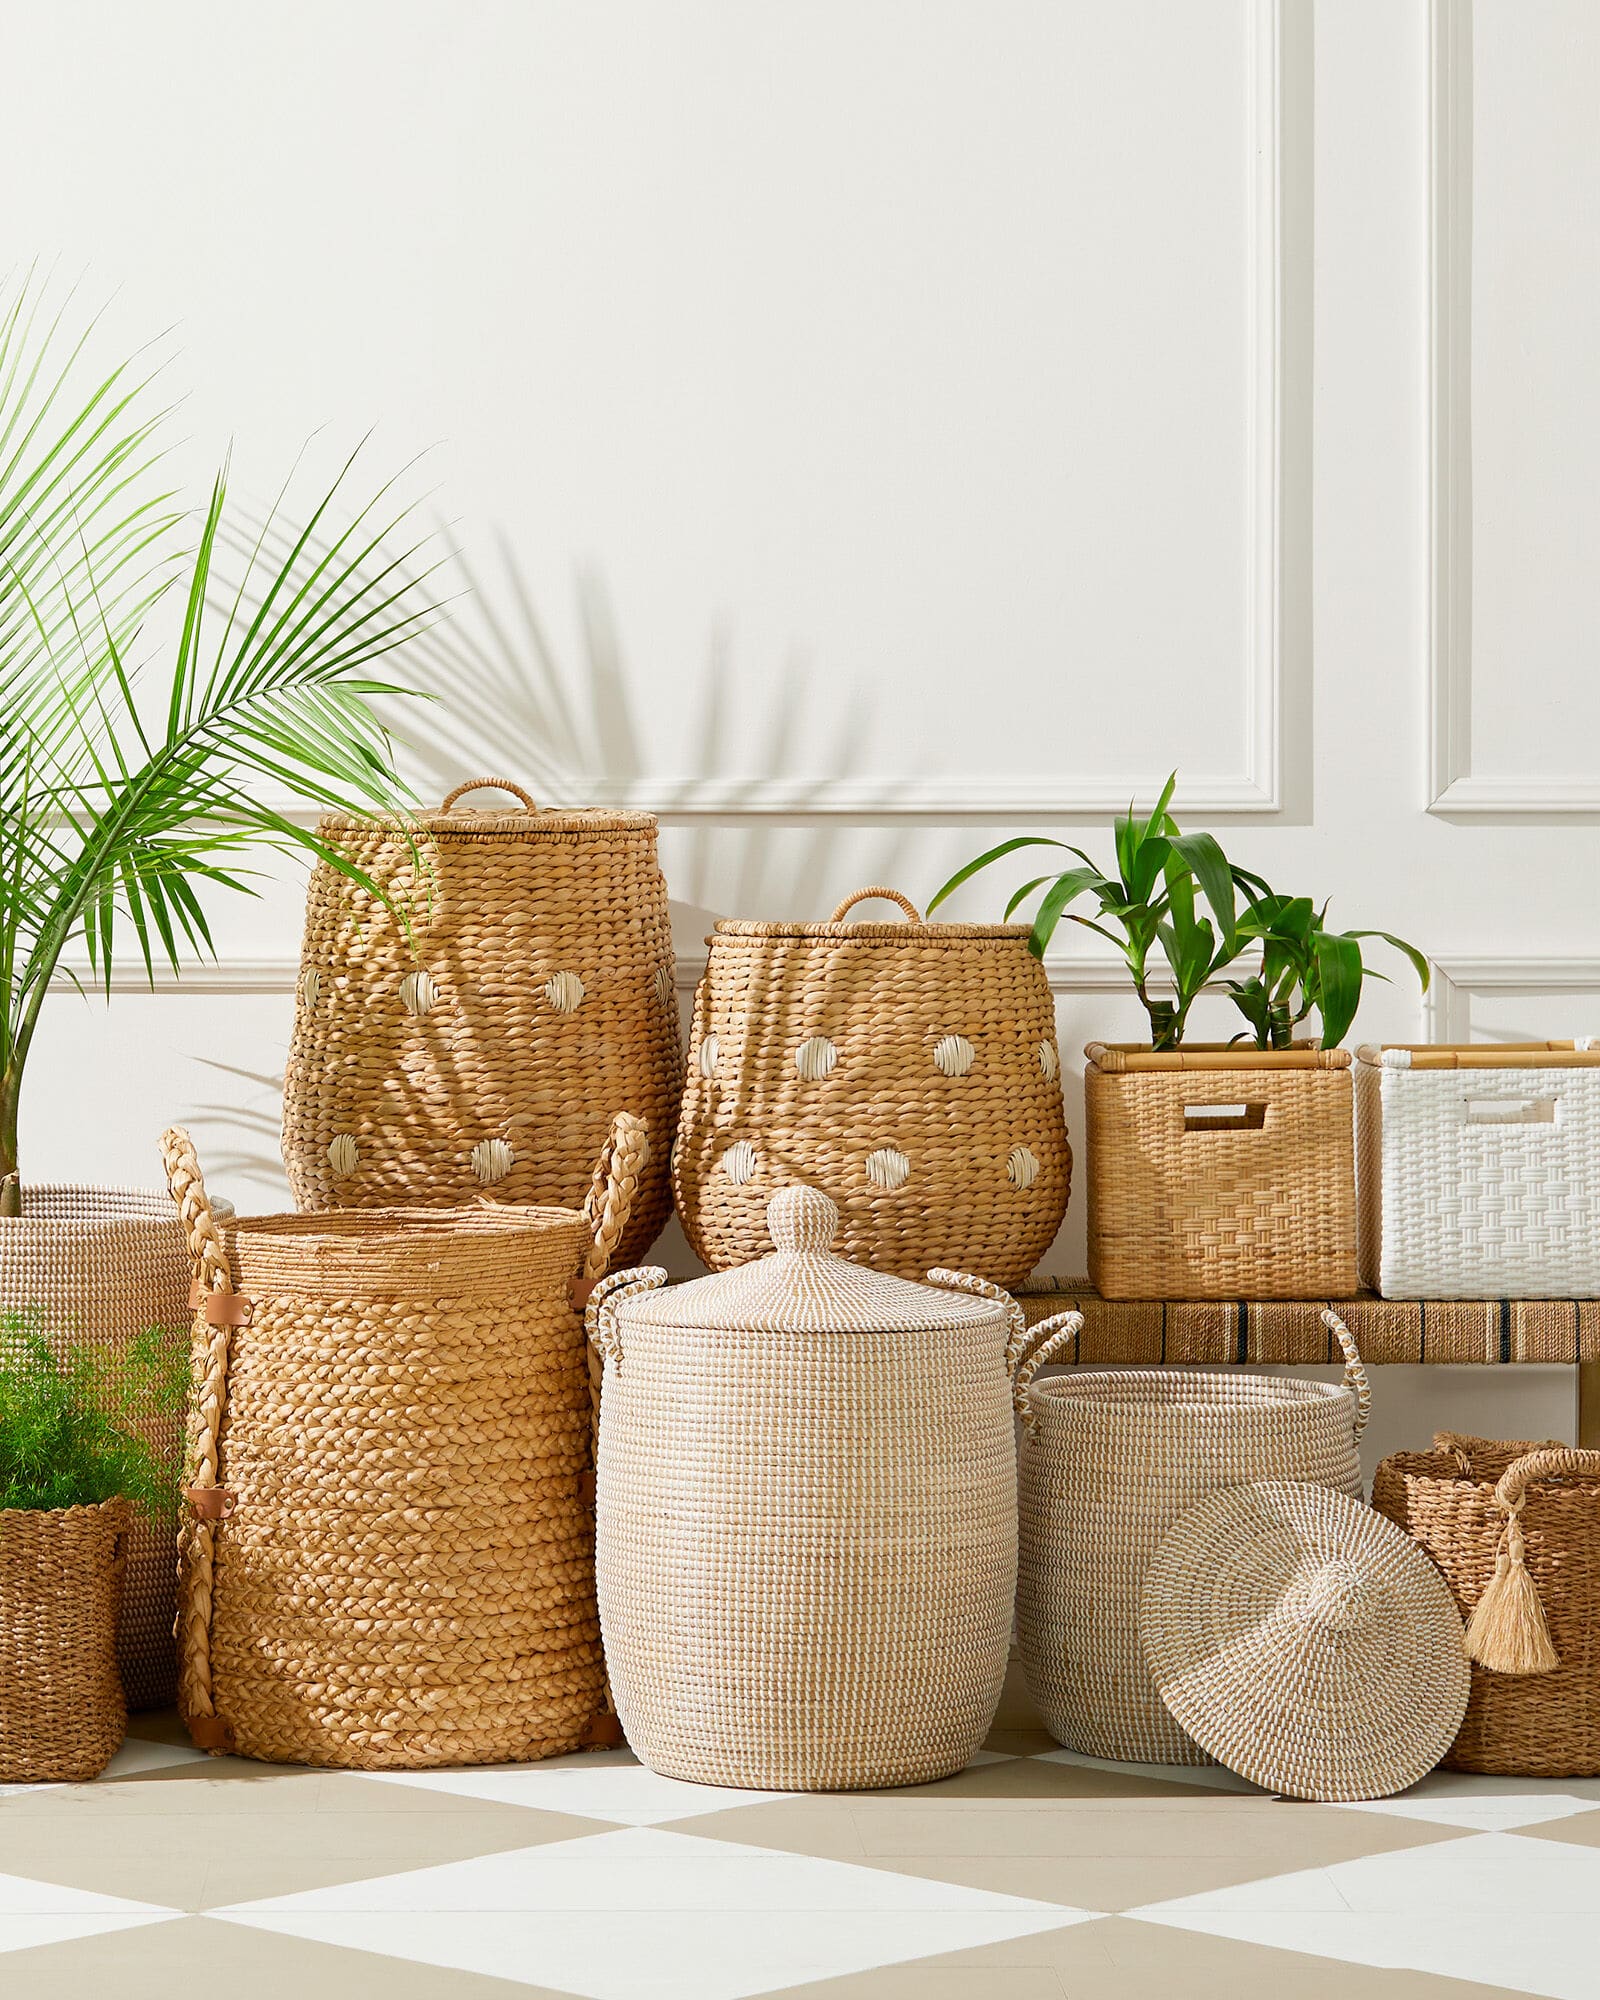 Favorite storage baskets from Serena & Lily ,gracious in size and perfect for organizing your home. organization | get organized | organize | organizing - breathtaking